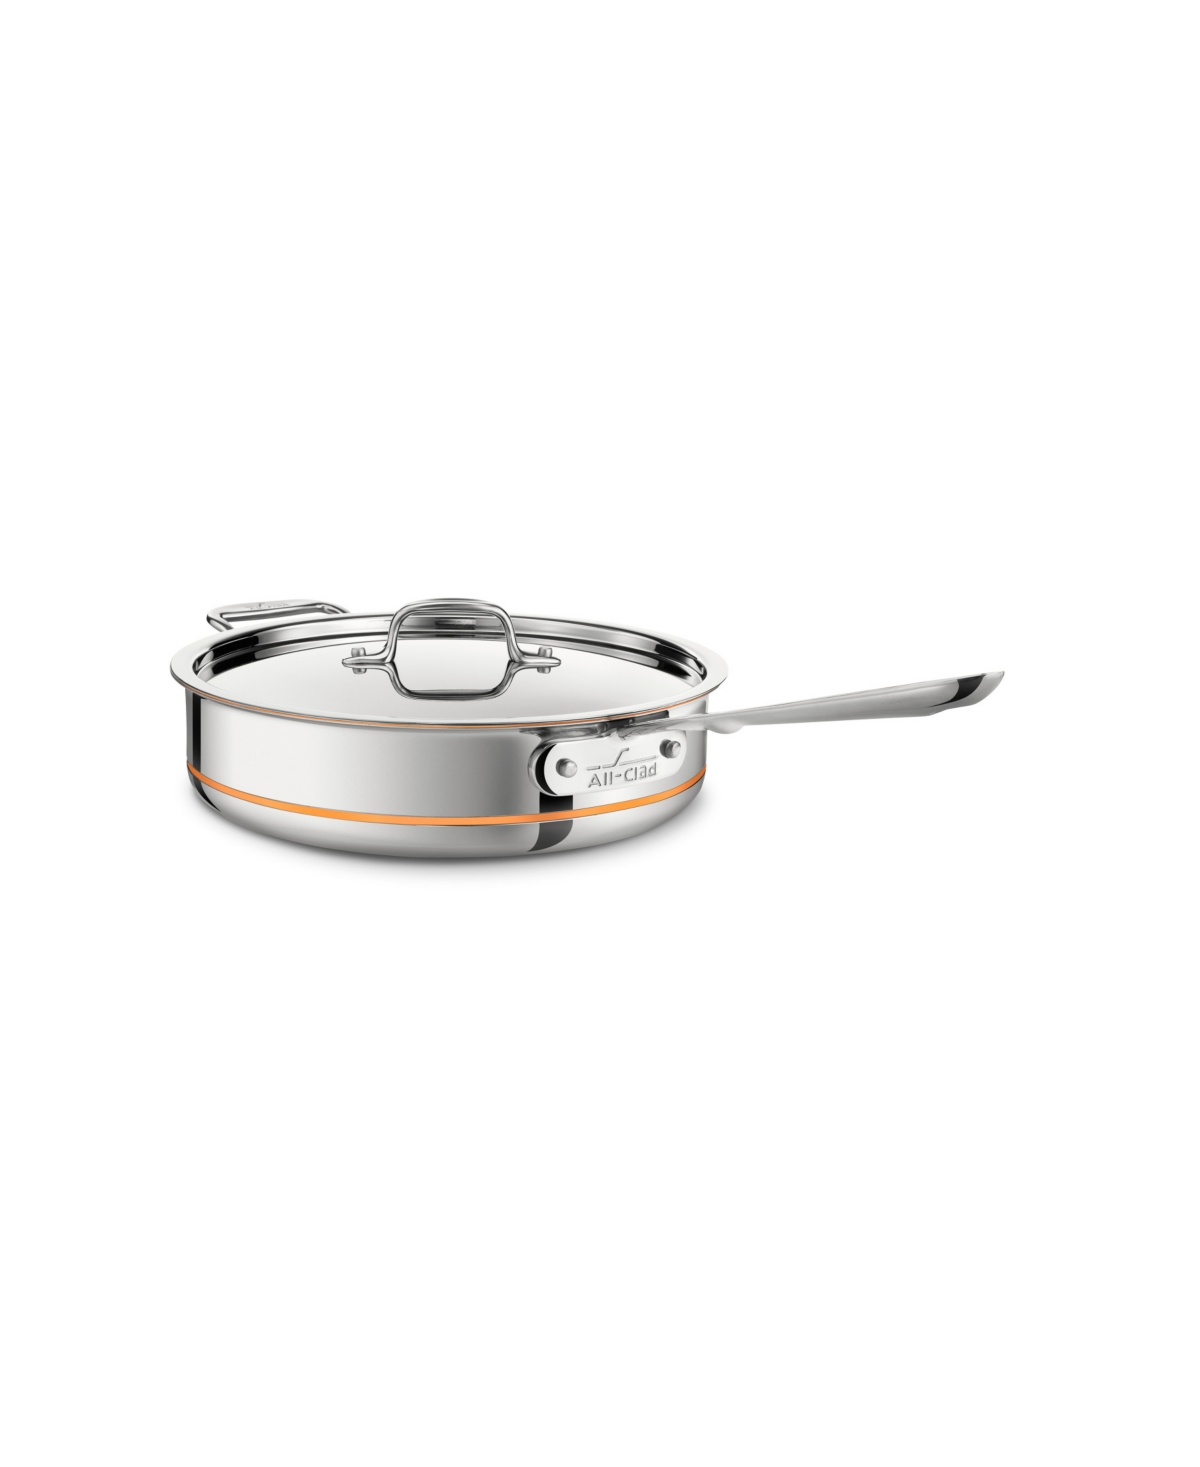 All-clad Stainless Steel, Aluminum And Copper Core 5-ply Bonded 5-quart Saute Pan With Lid In Silver